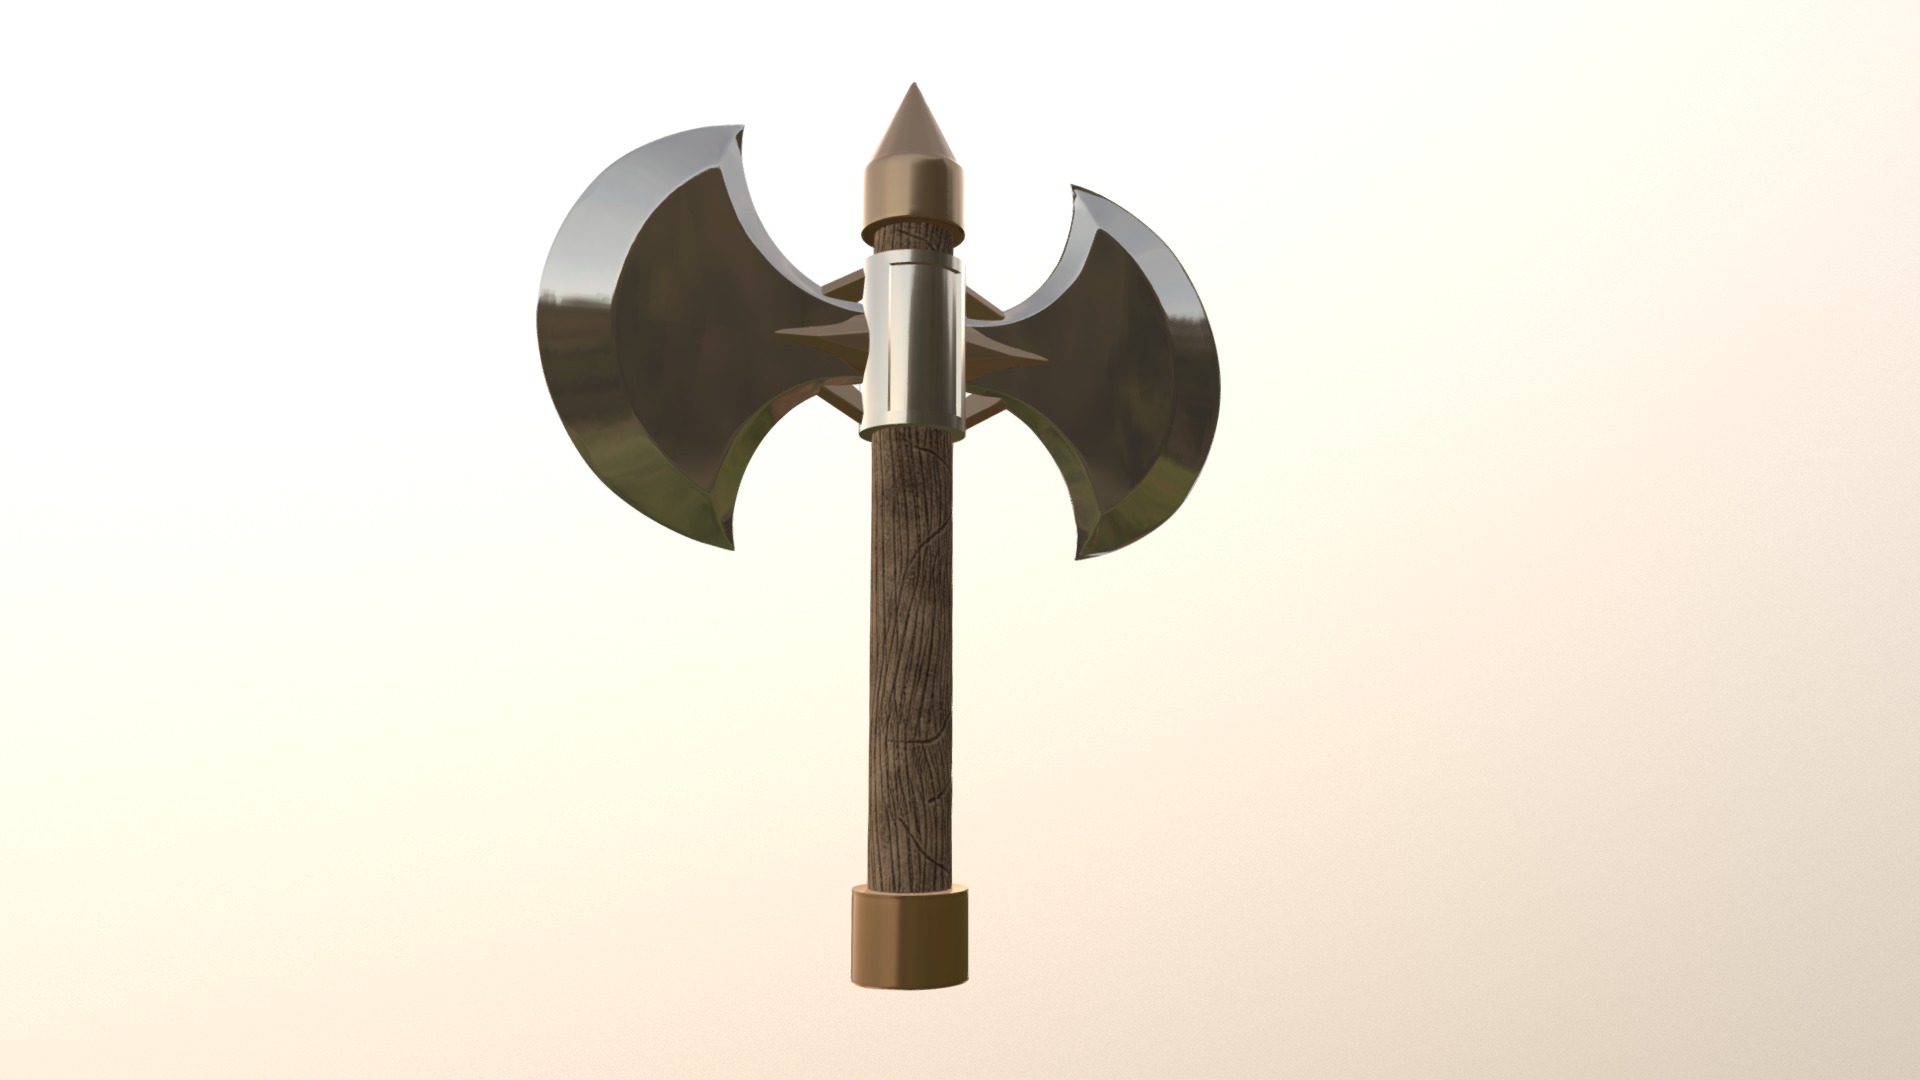 3D model Stonecutter Axe – Tibia - This is a 3D model of the Stonecutter Axe - Tibia. The 3D model is about a metal cross with a wooden handle.